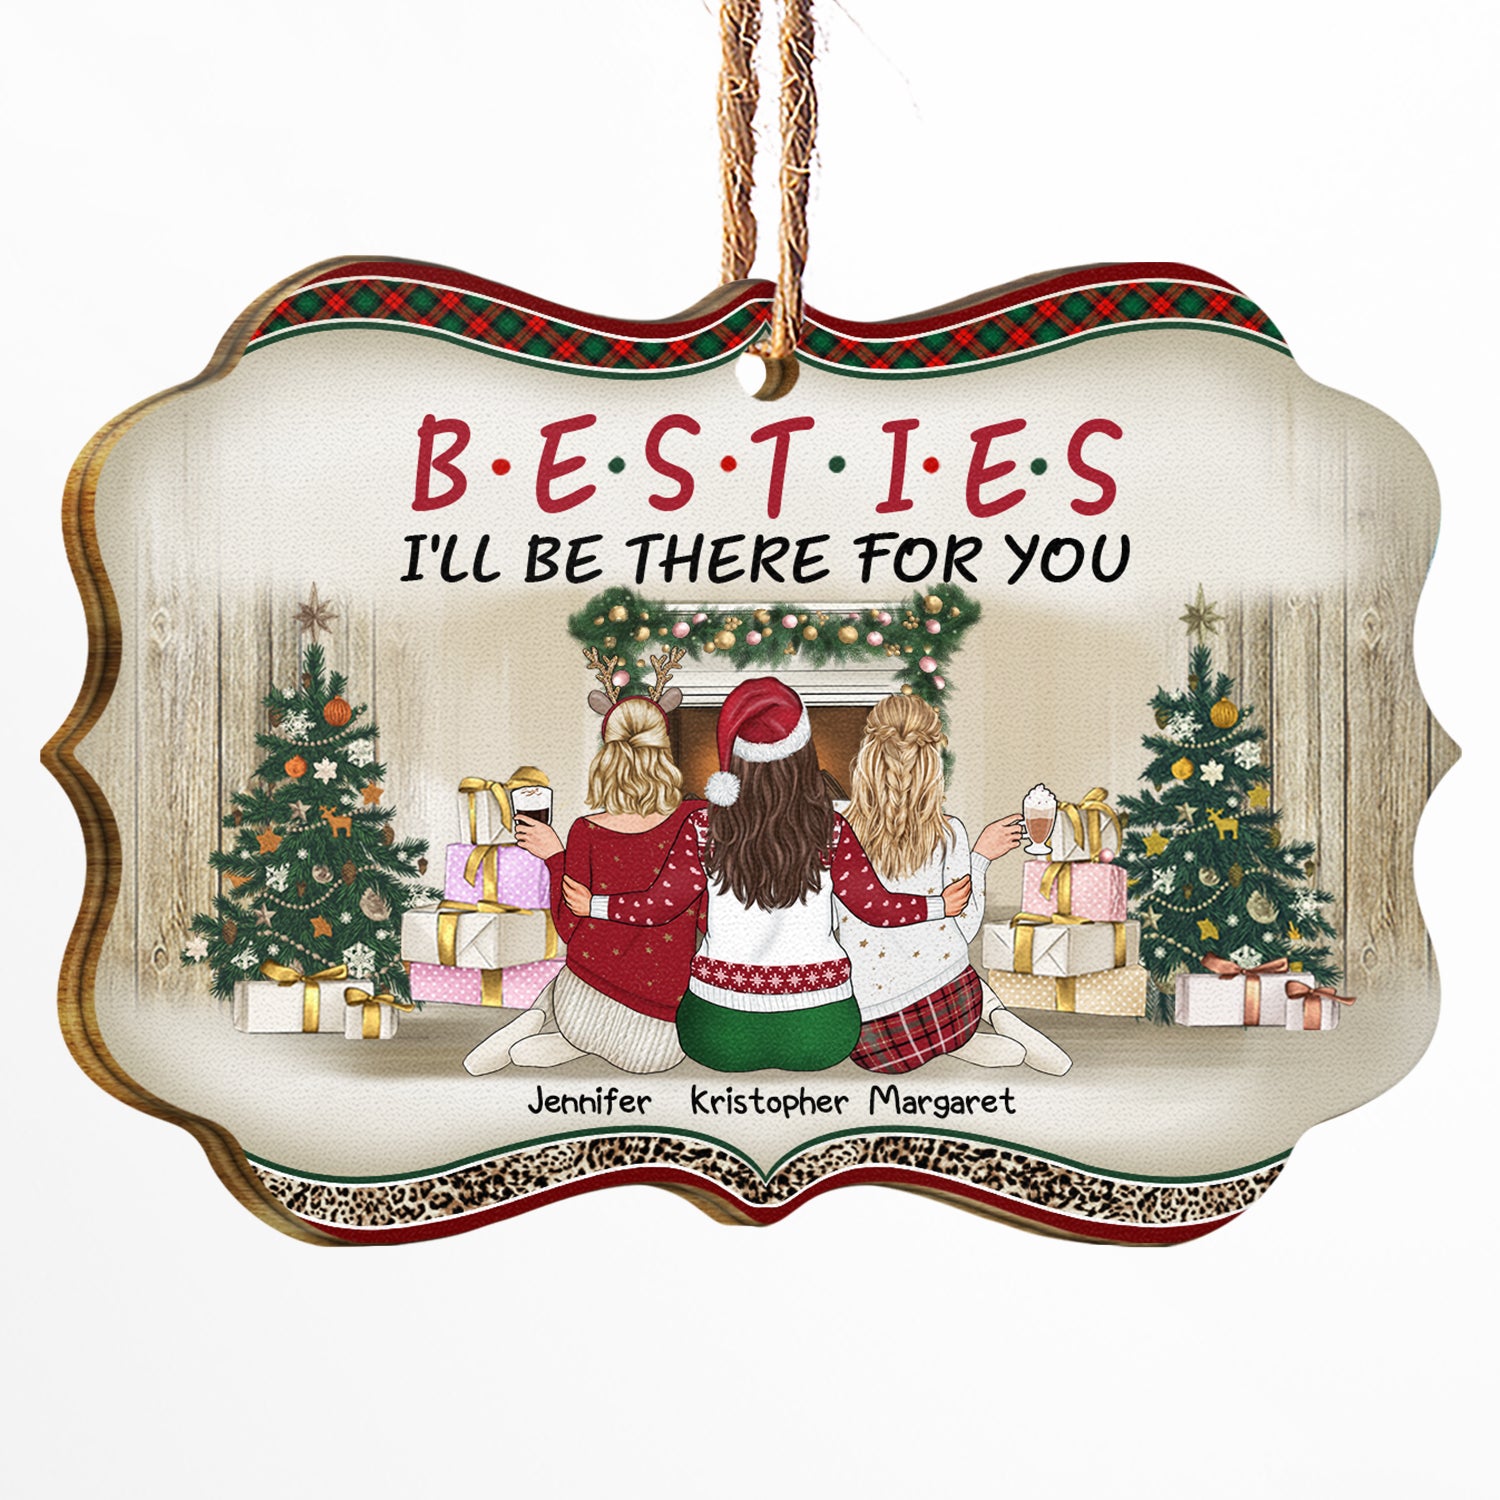 Besties I'll Be There For You - Christmas Gift For BFF & Sisters - Personalized Custom Wooden Ornament